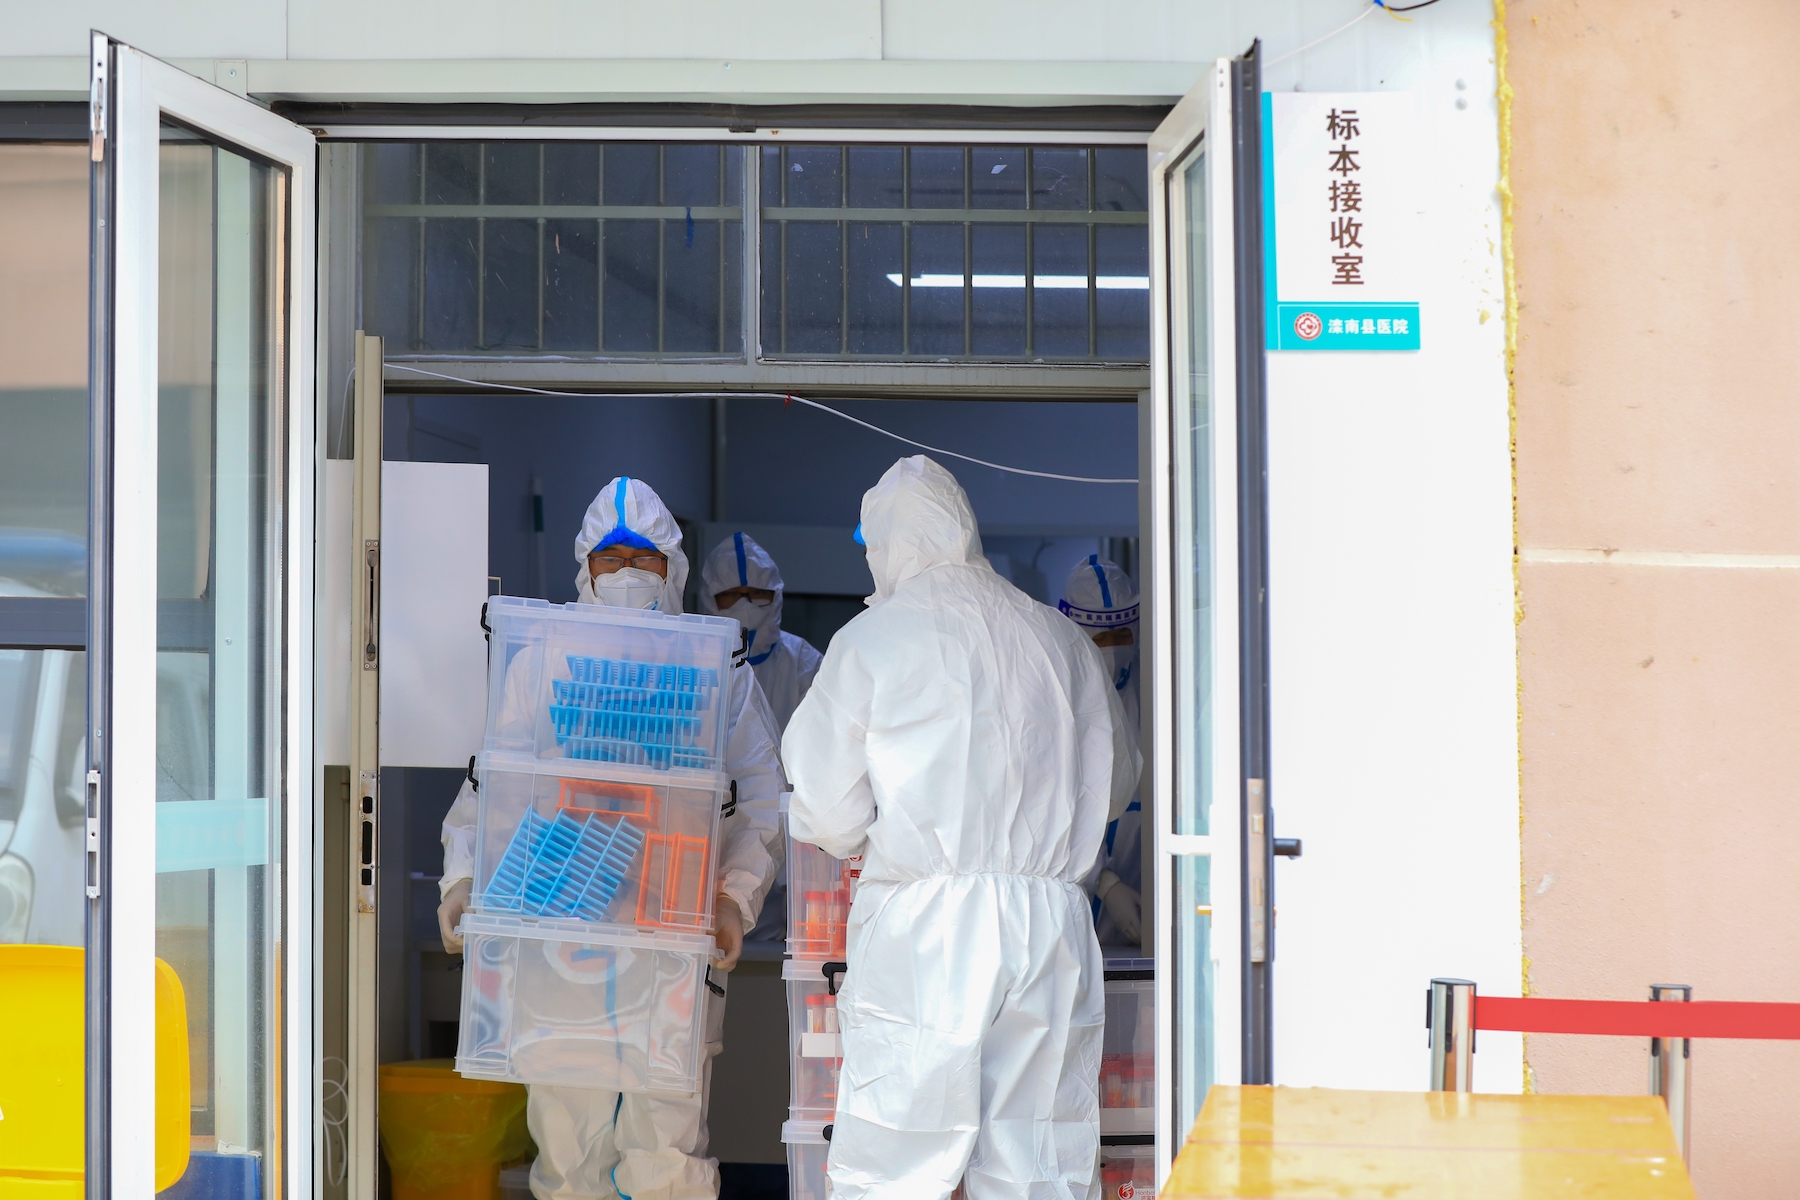 Two workers in white PPE carry boxes of supplies into a facility